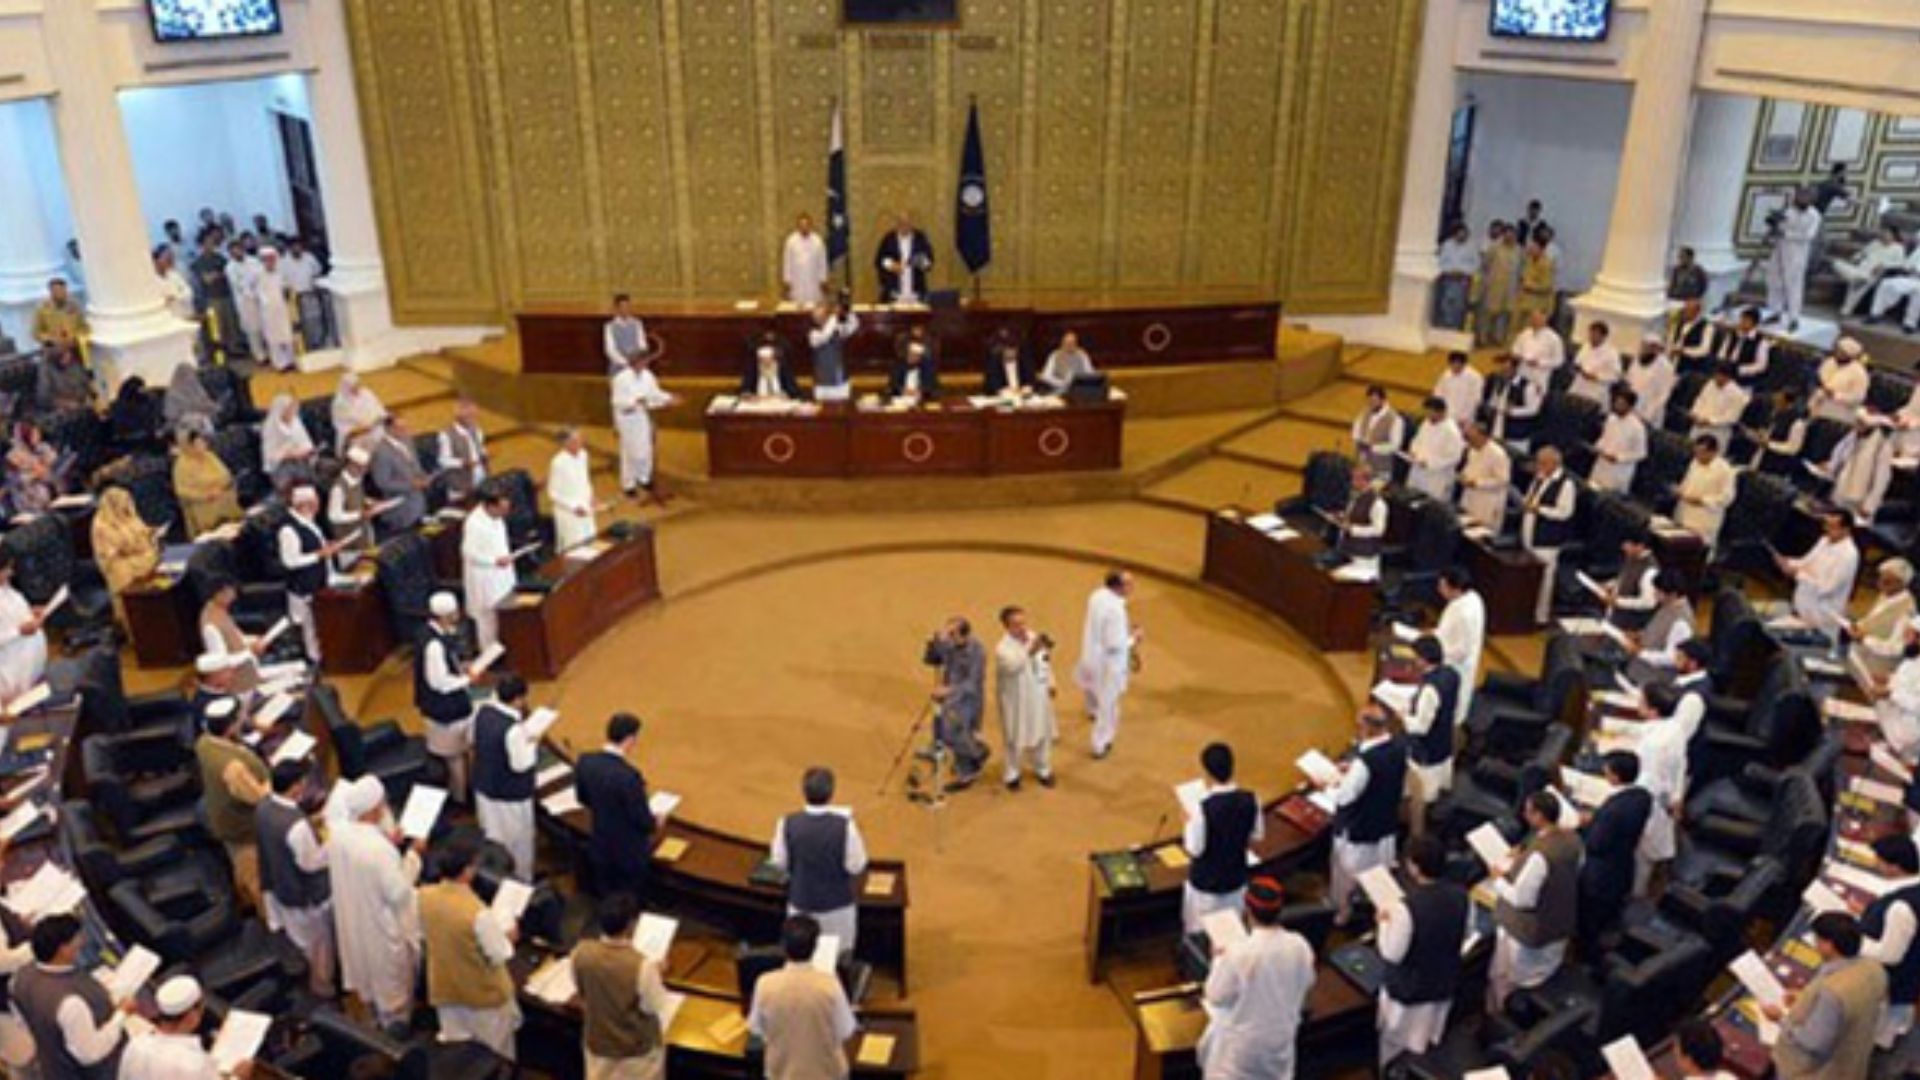 Balochistan’s newly elected MPAs will swear in today